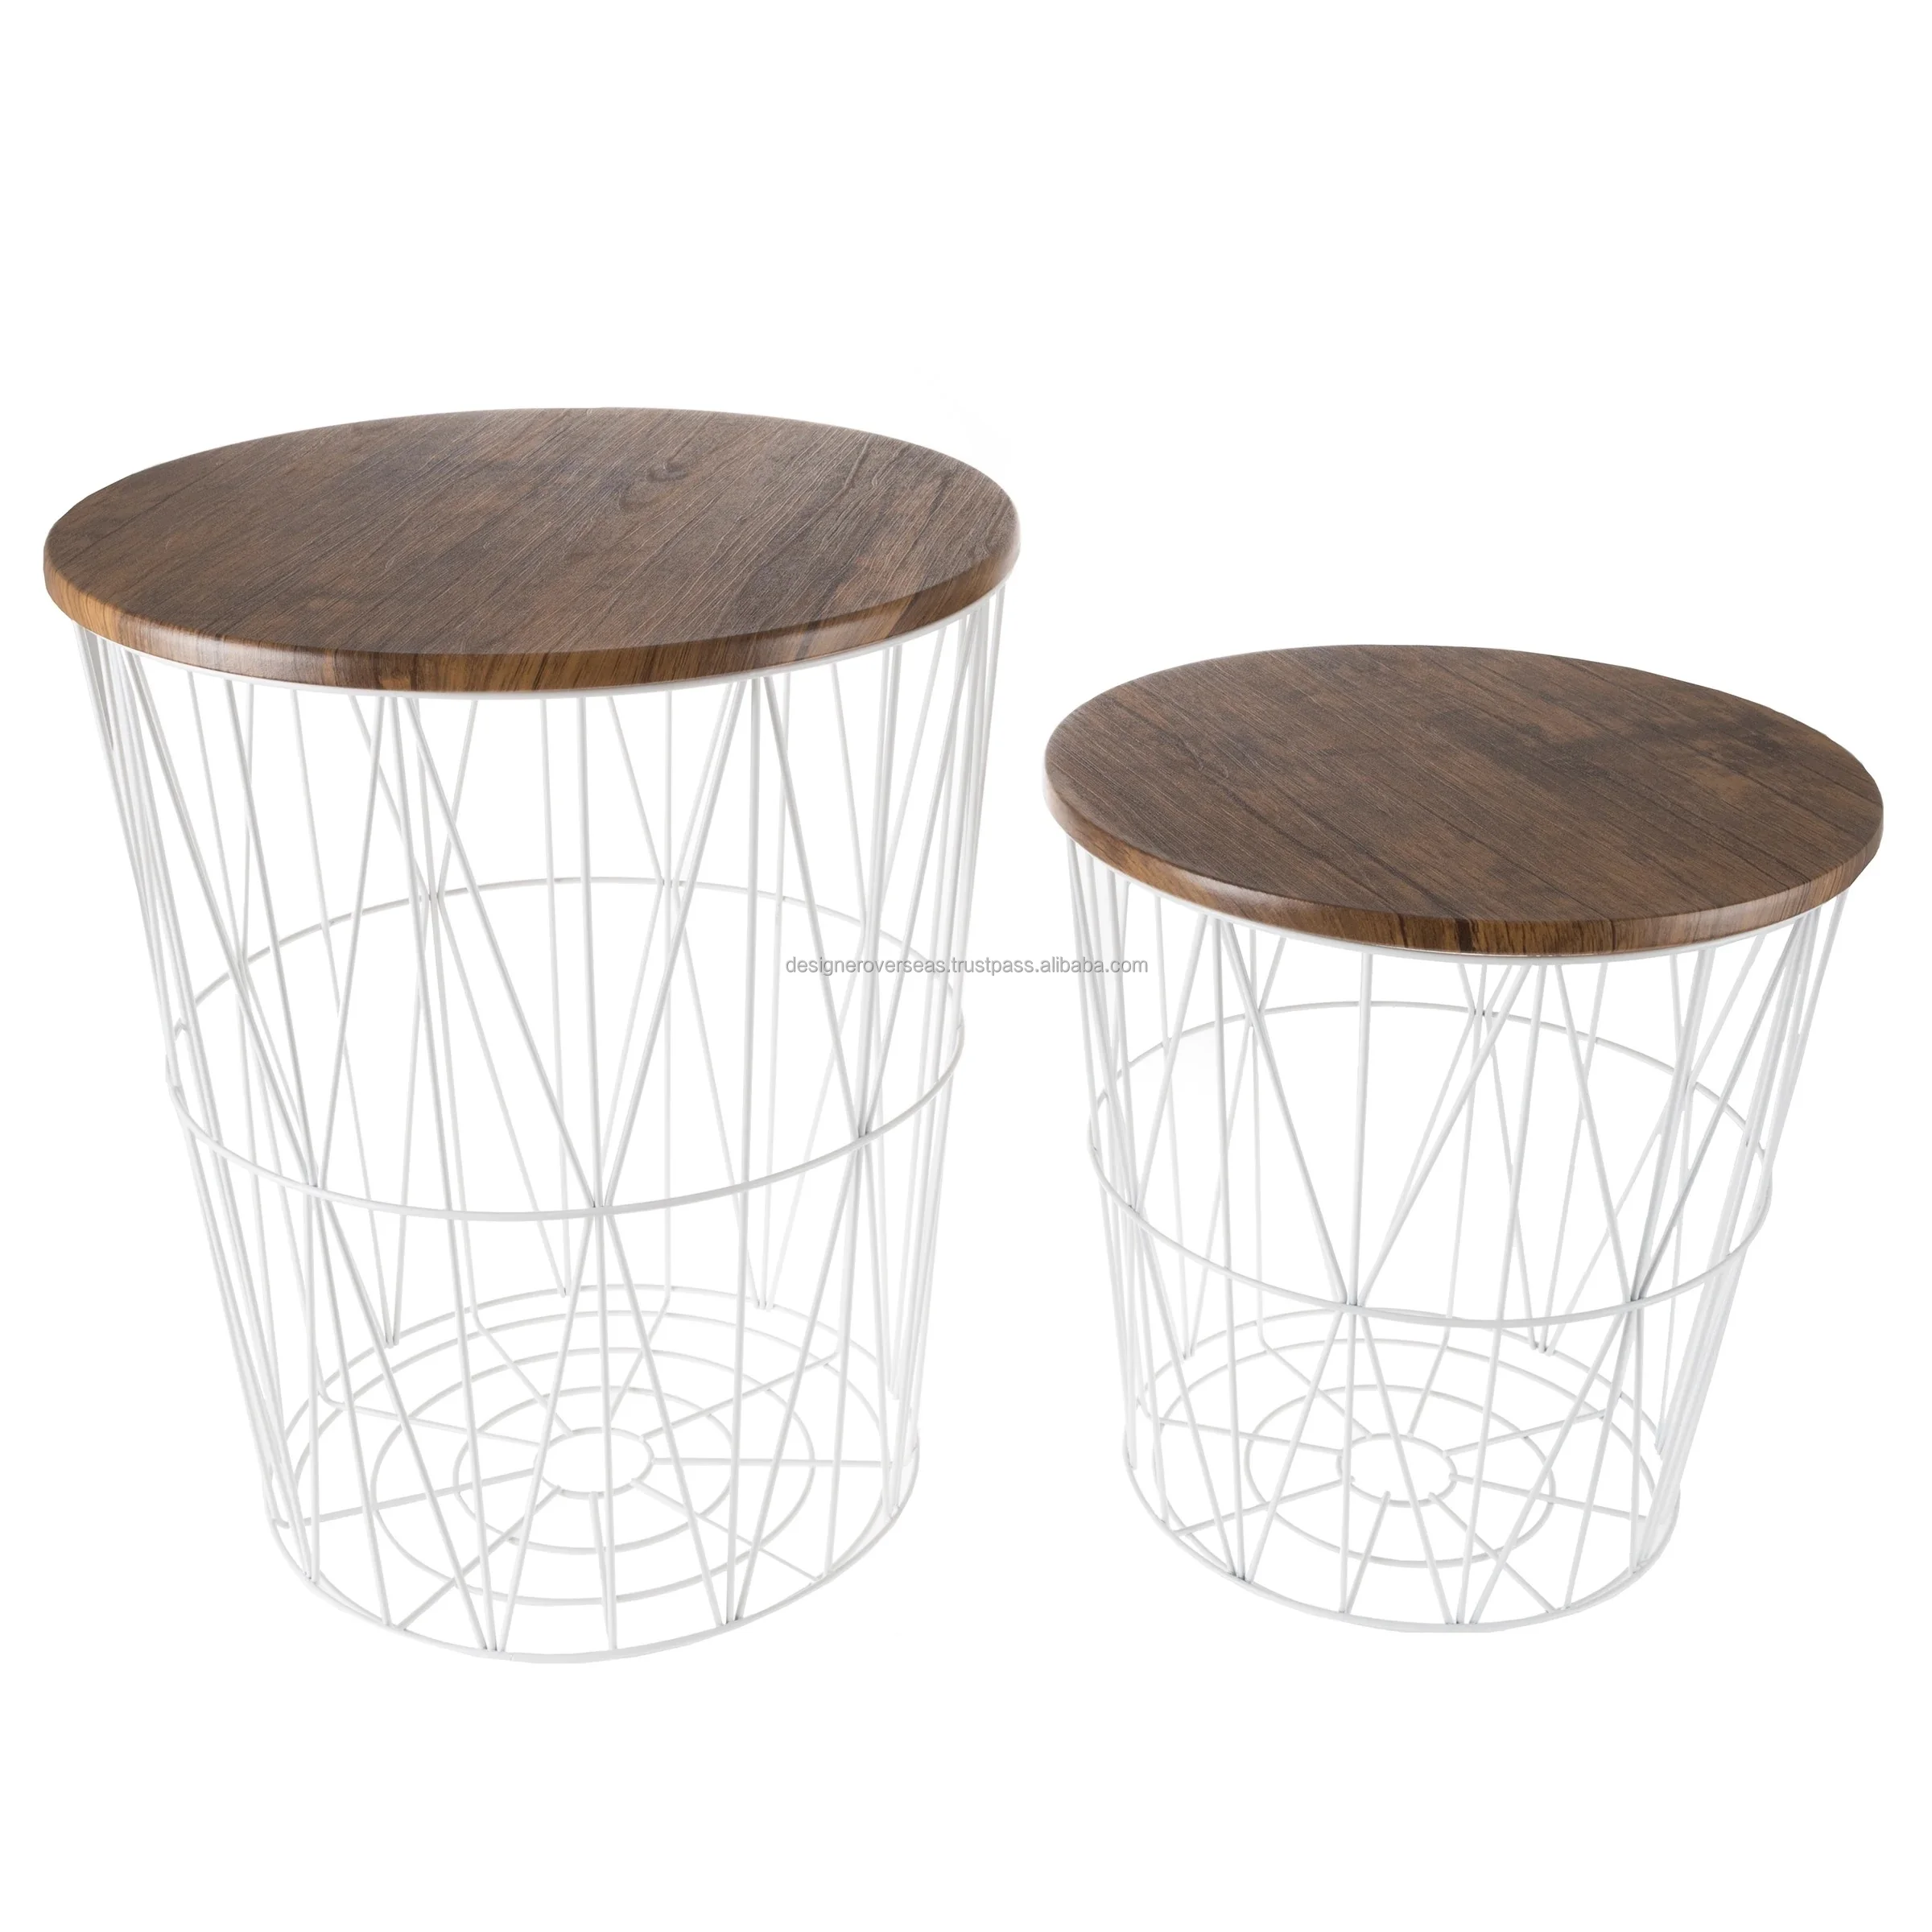 Crisscross Metal Framework Base with MDF Wood Tops Nesting End Tables with Additional Storage Set of 2 For Living Room Furniture